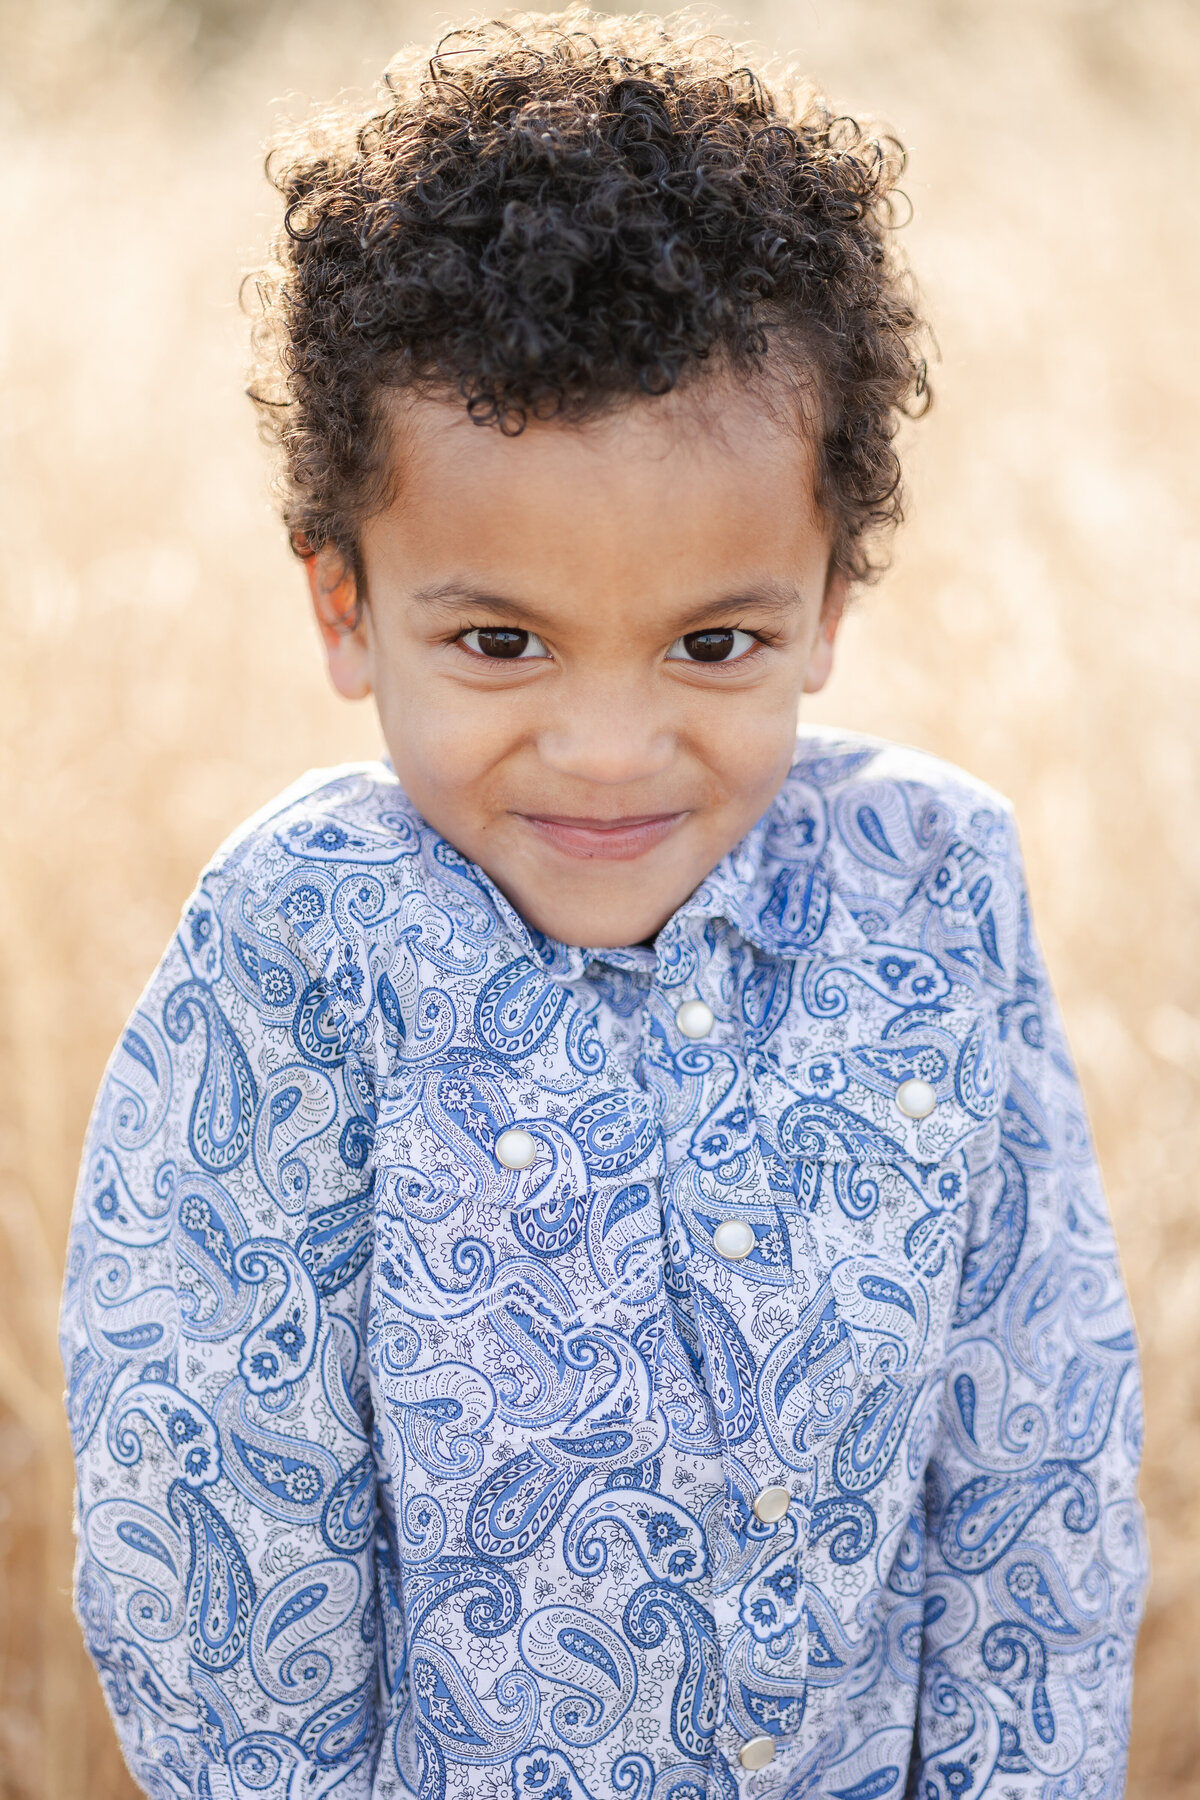 Colorado Springs Family Photographer- bou standing with cute look on his face in front of tall grass